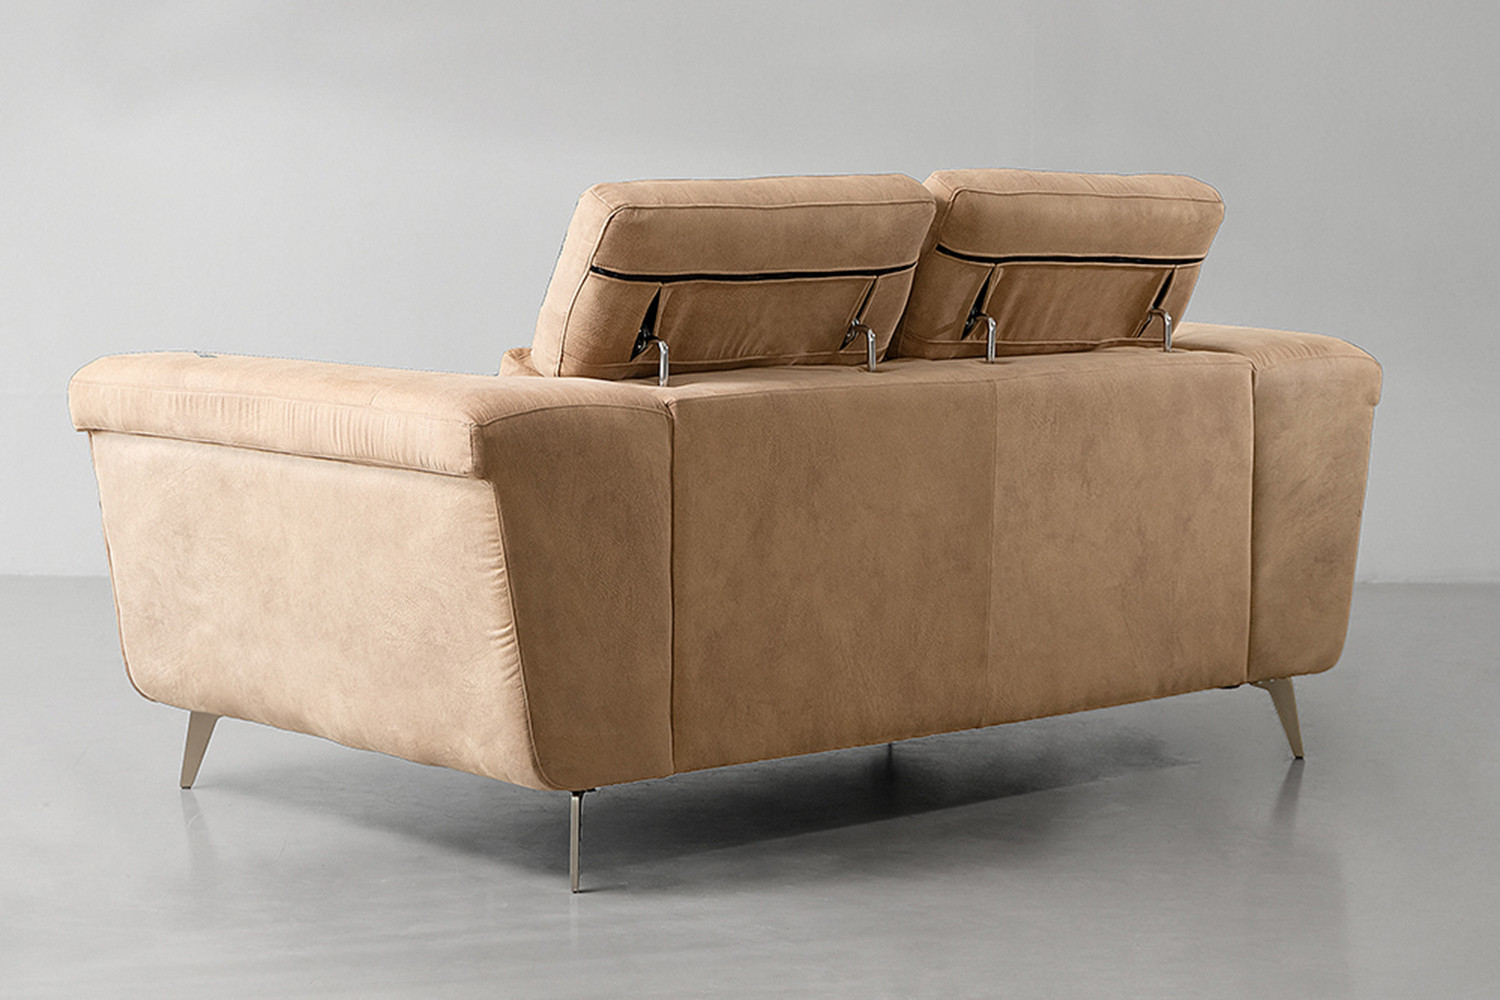 Laurence 2 Seater Couch - Tan 2 Seater Couches - 6